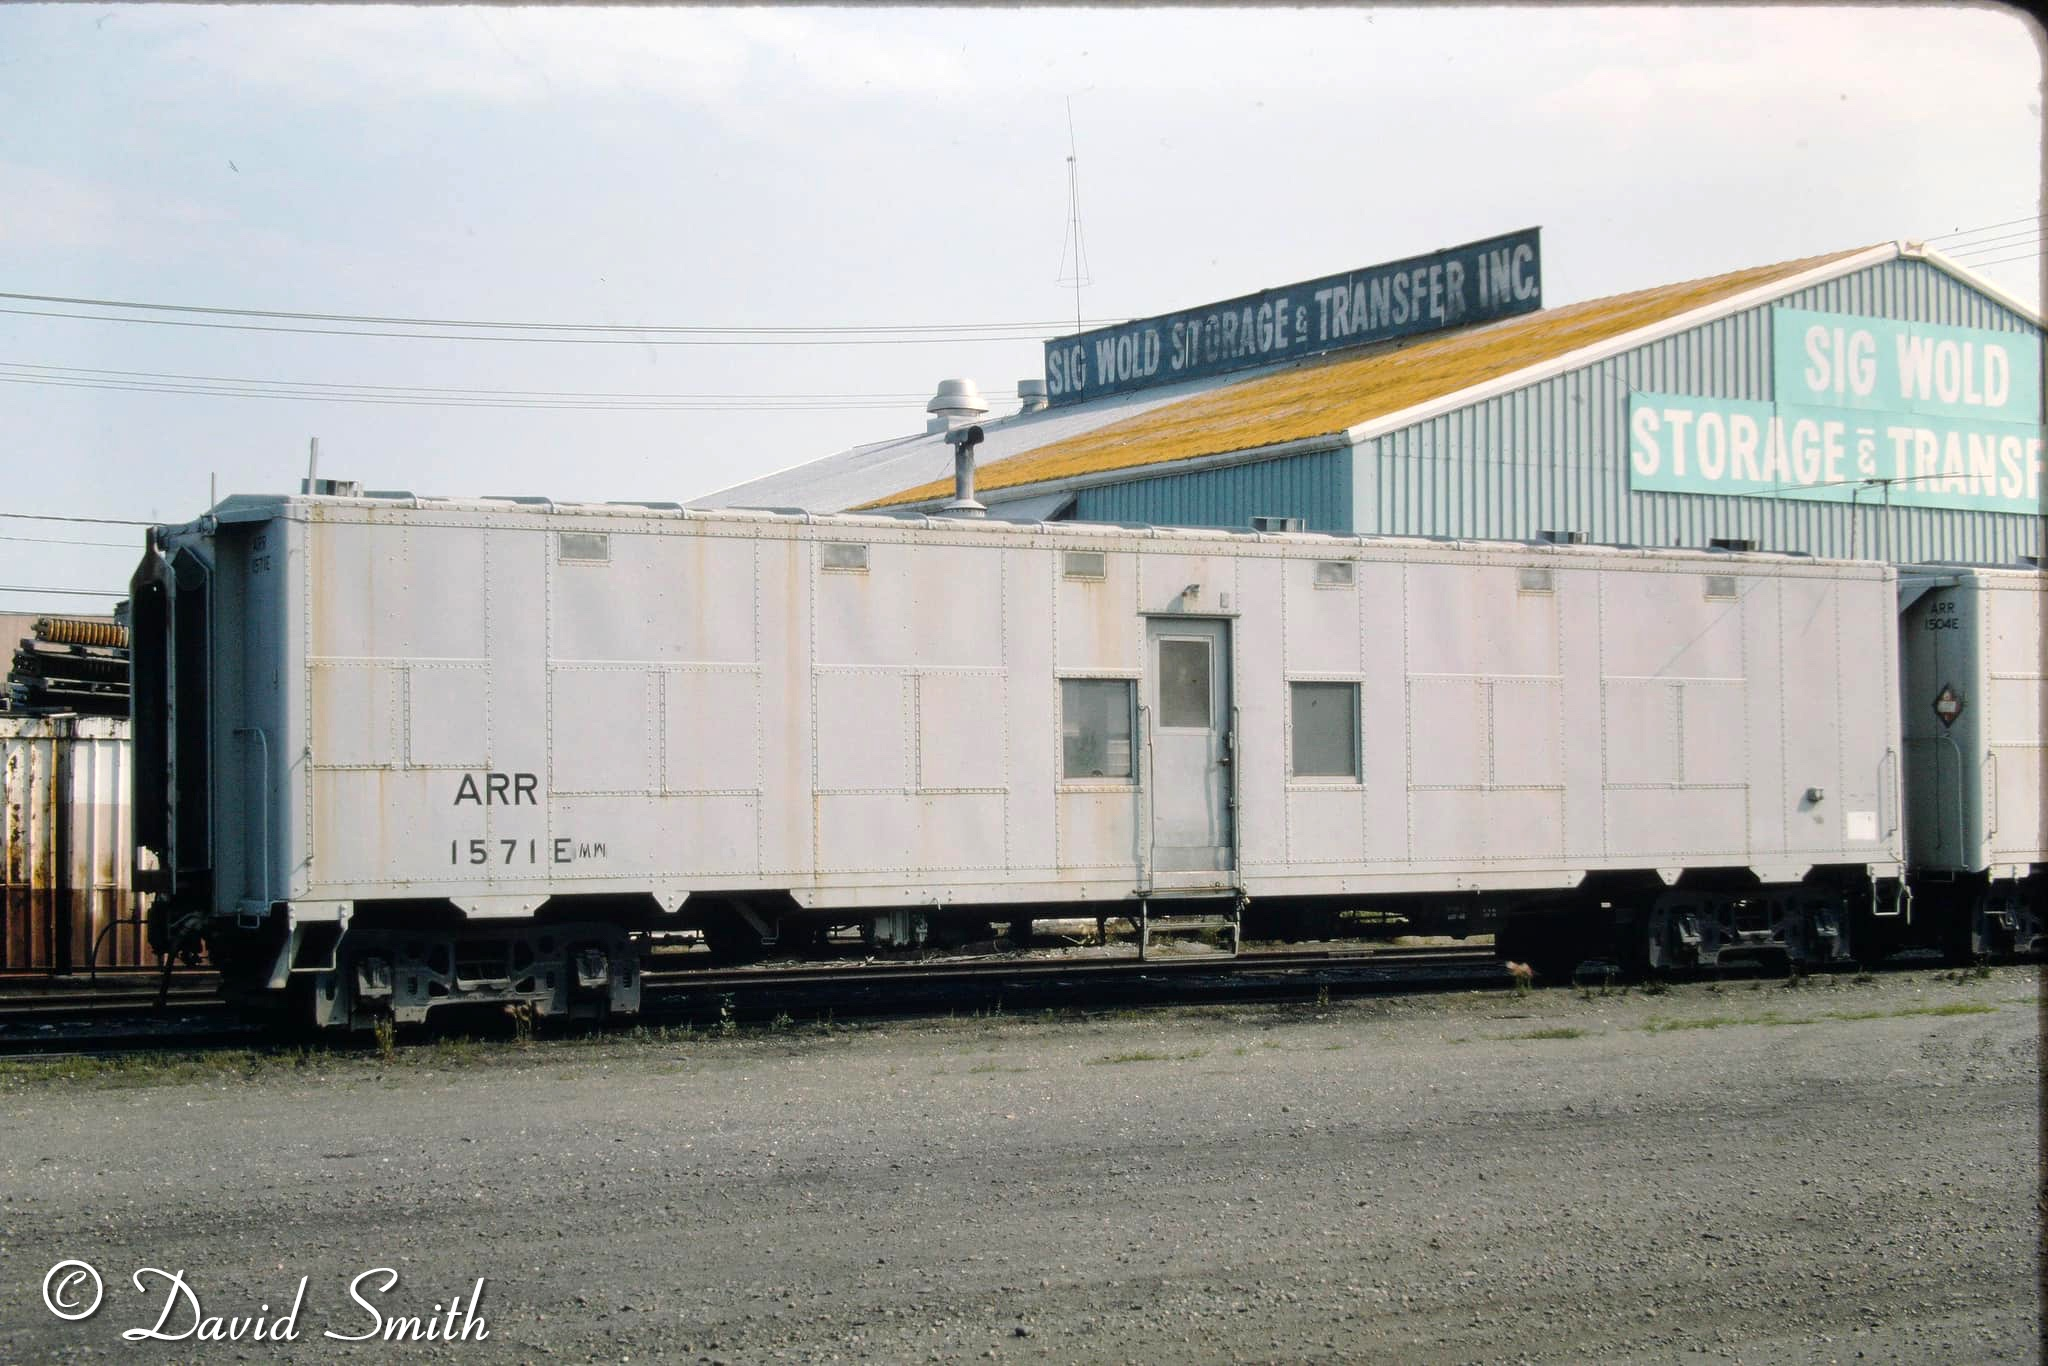 Outfit Car 1571E built from a Troop Sleeper. Fairbanks, AK 7/7/87.